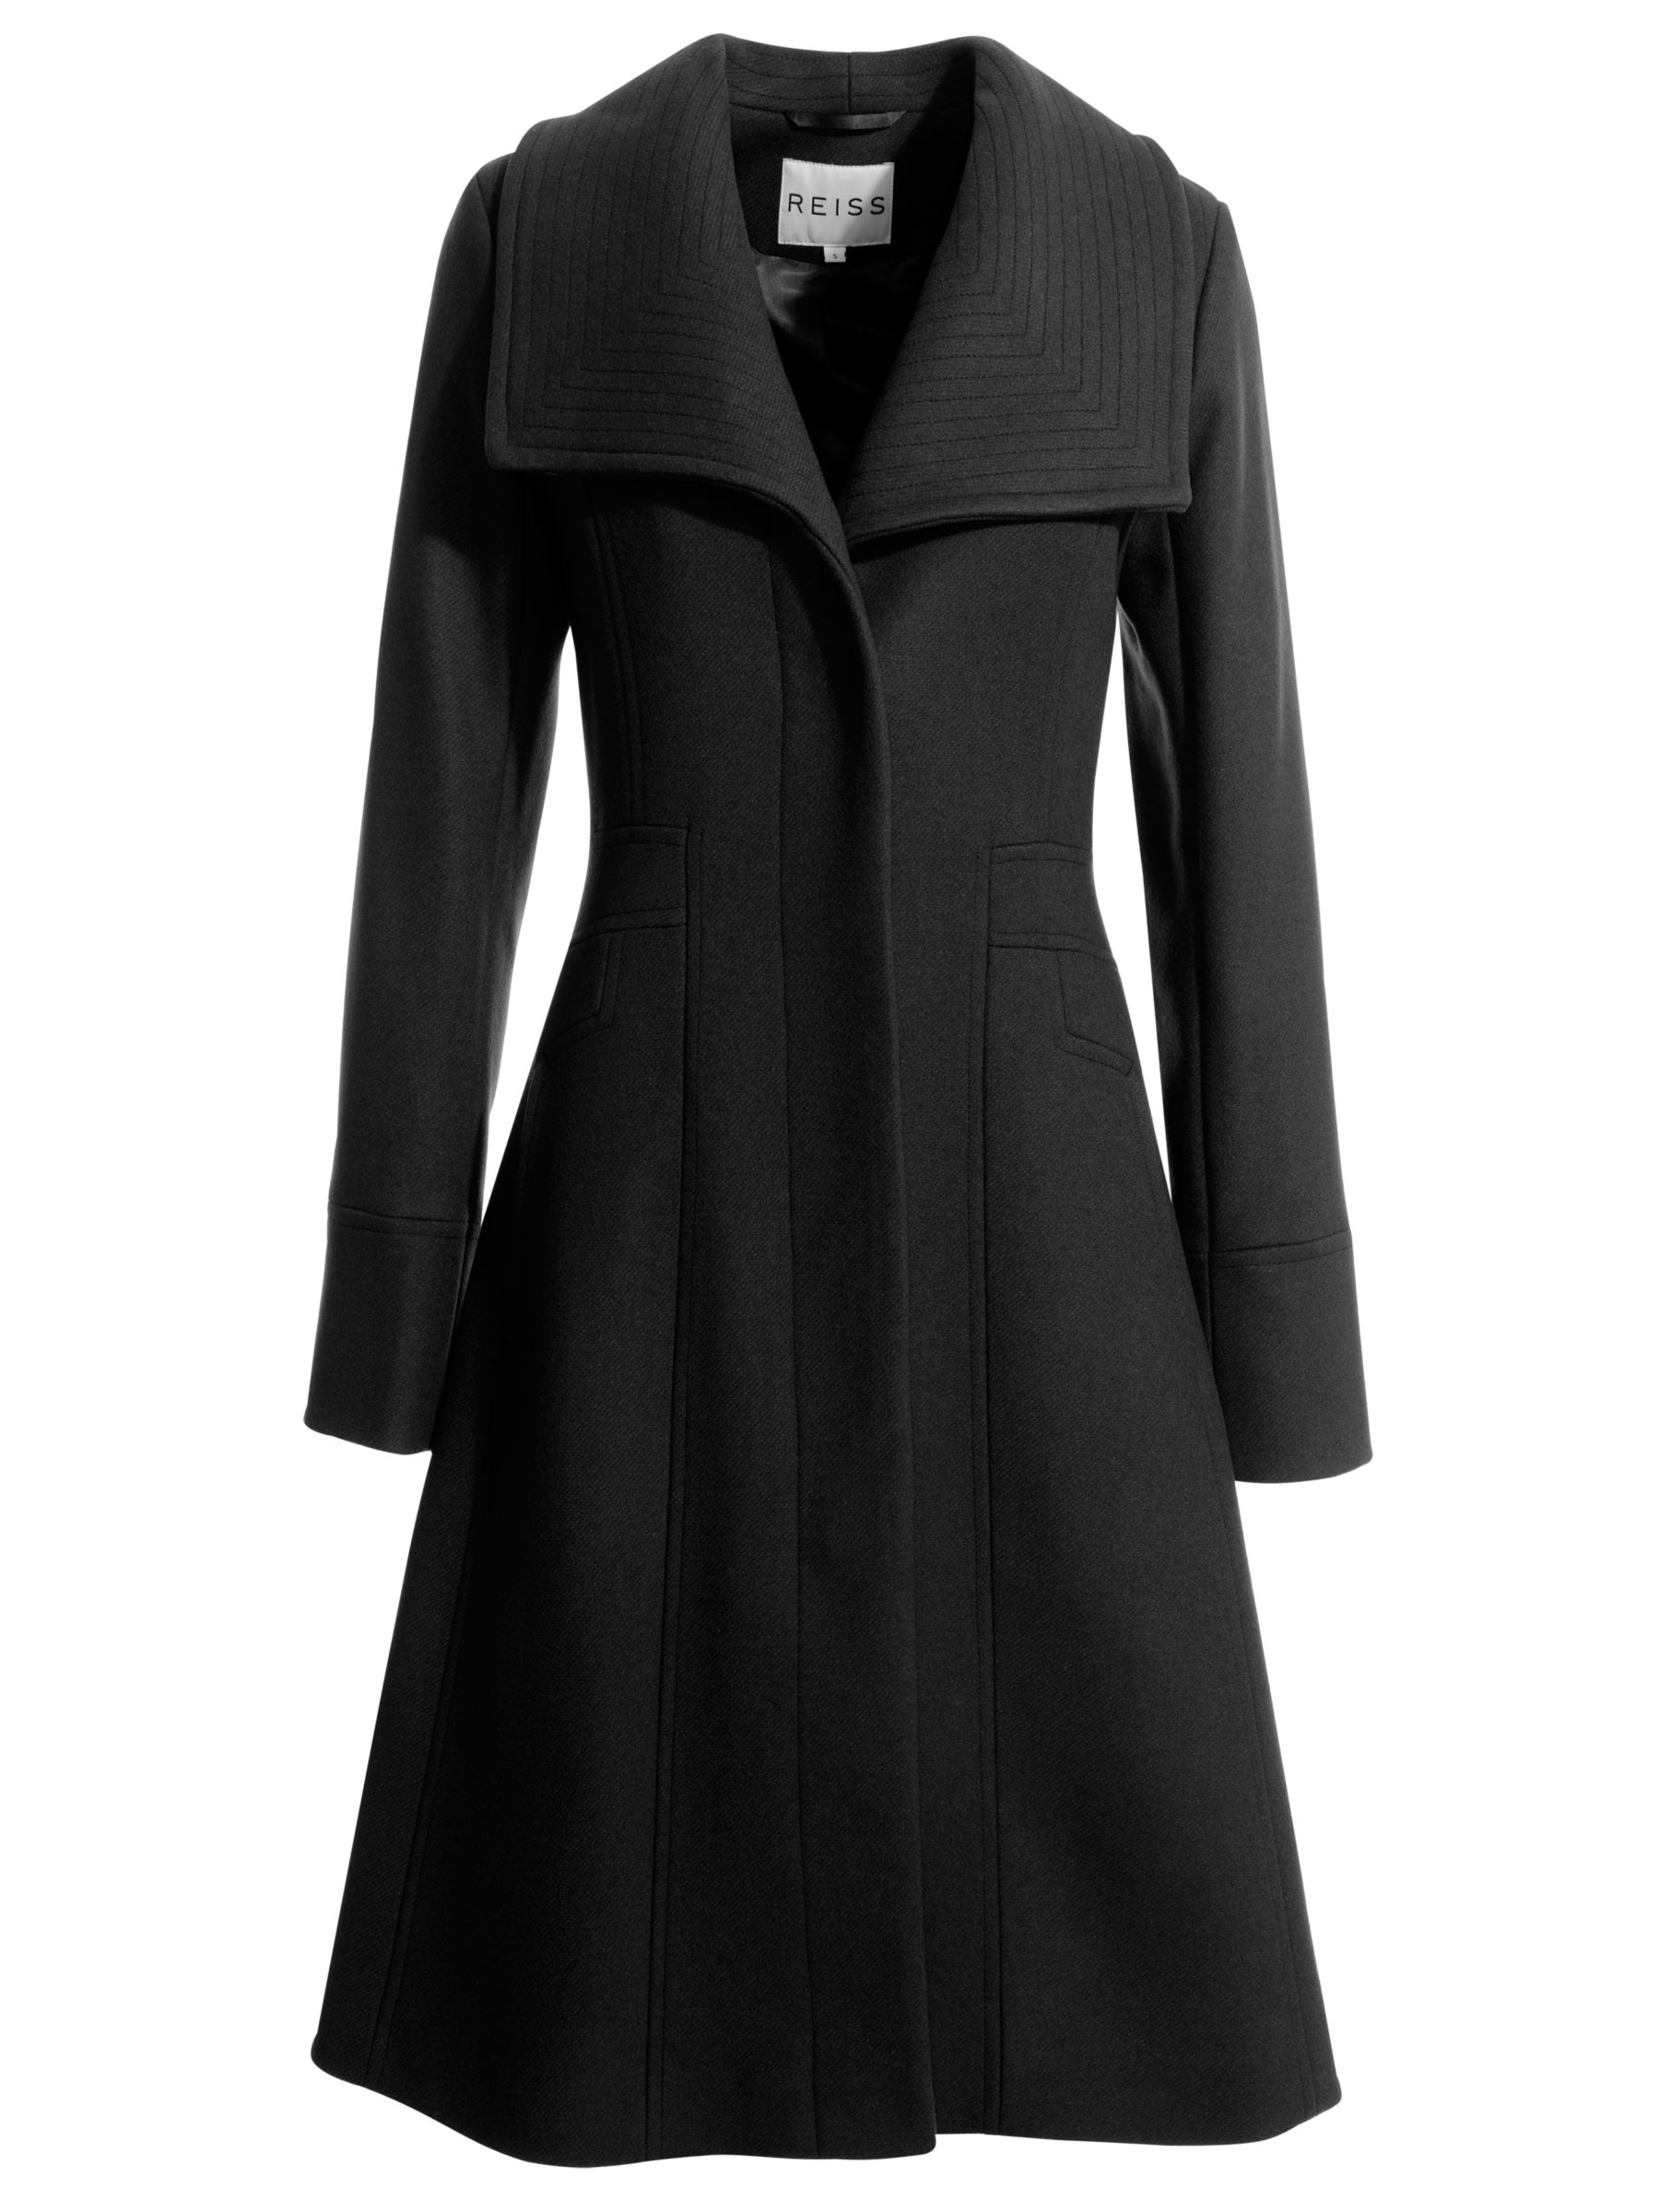 Reiss Angel Fit And Flare Coat, Black at JohnLewis